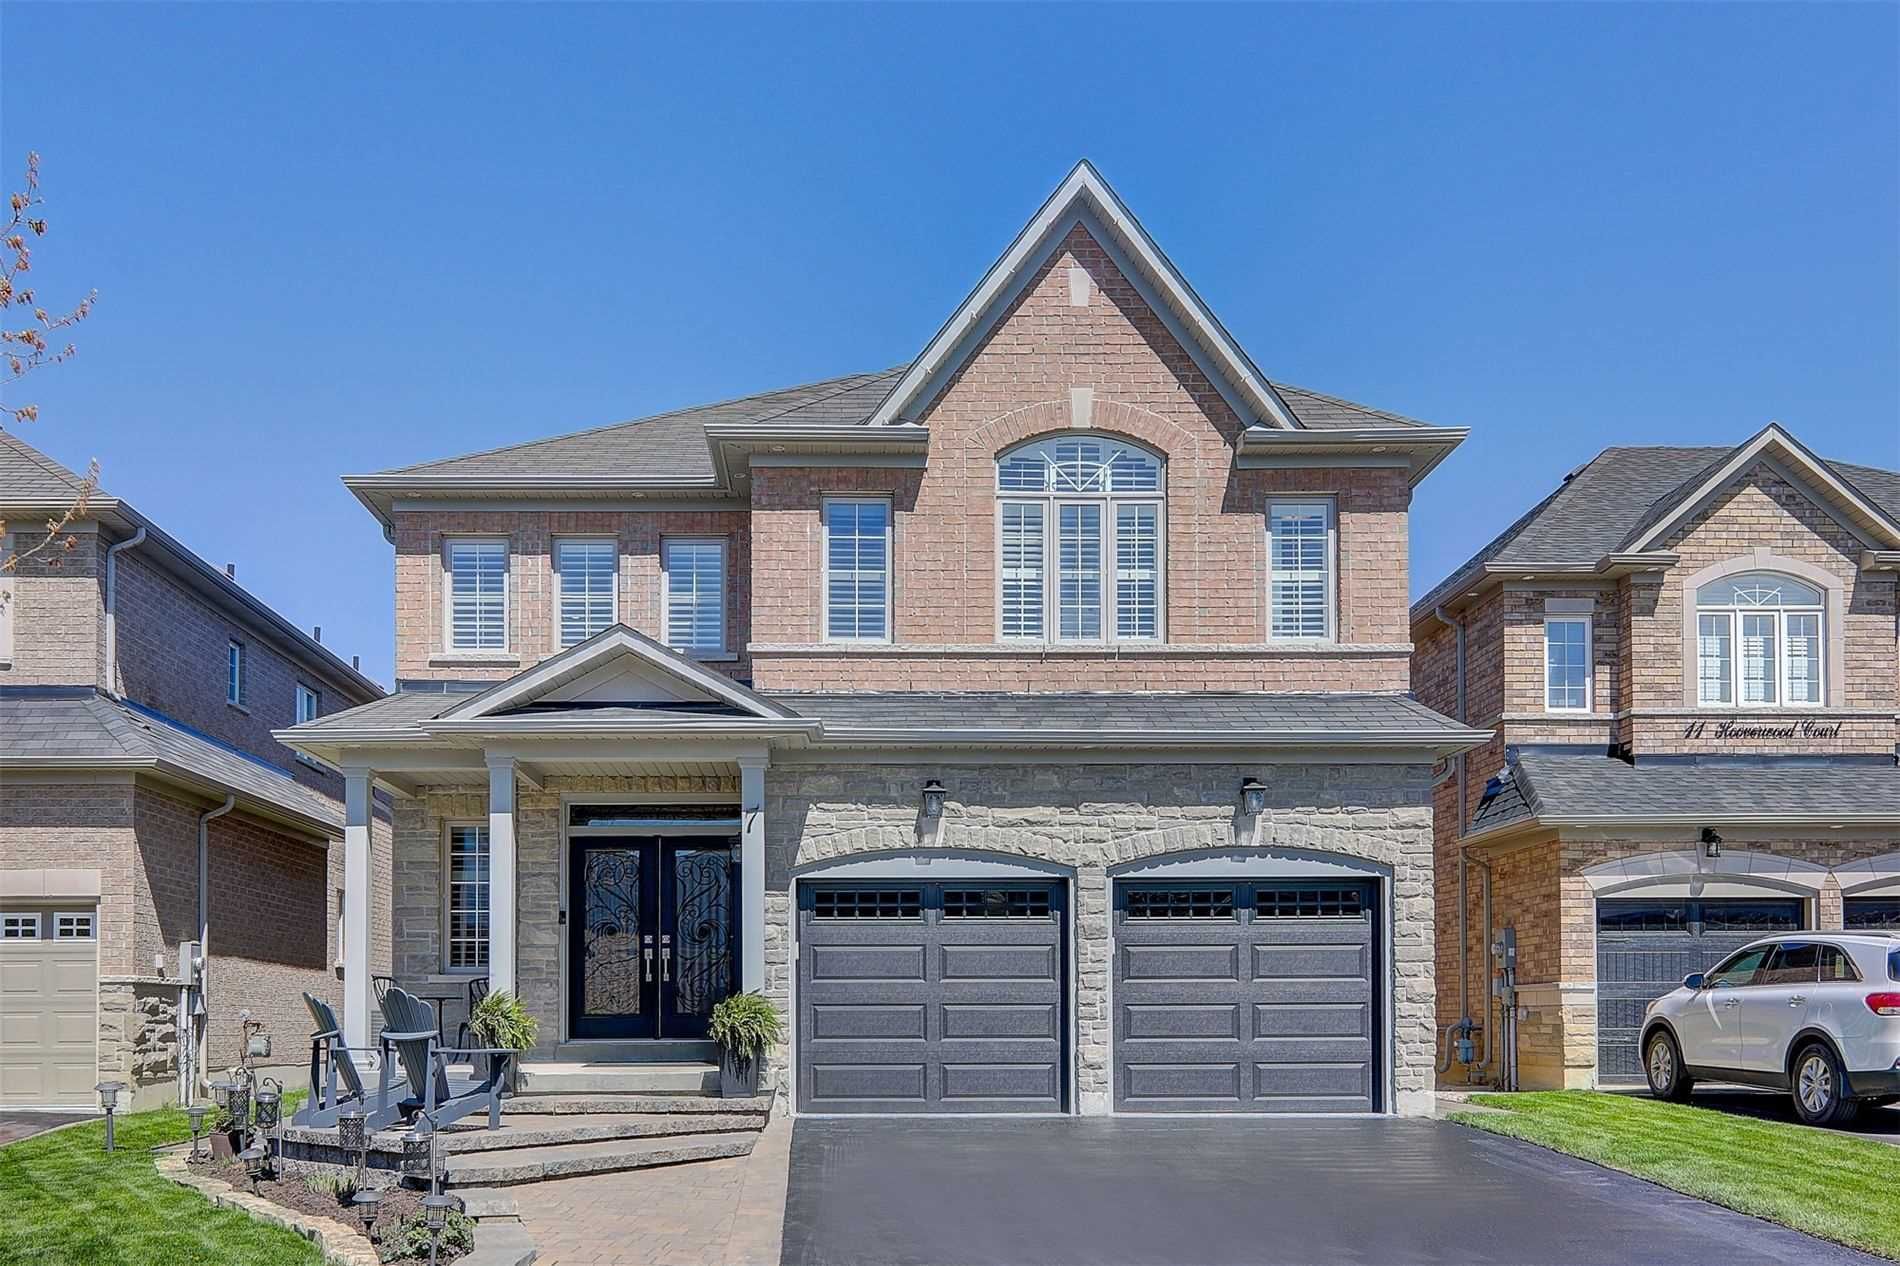 Main Photo: 7 Hooverwood Court in Whitchurch-Stouffville: Stouffville House (2-Storey) for sale : MLS®# N5231307